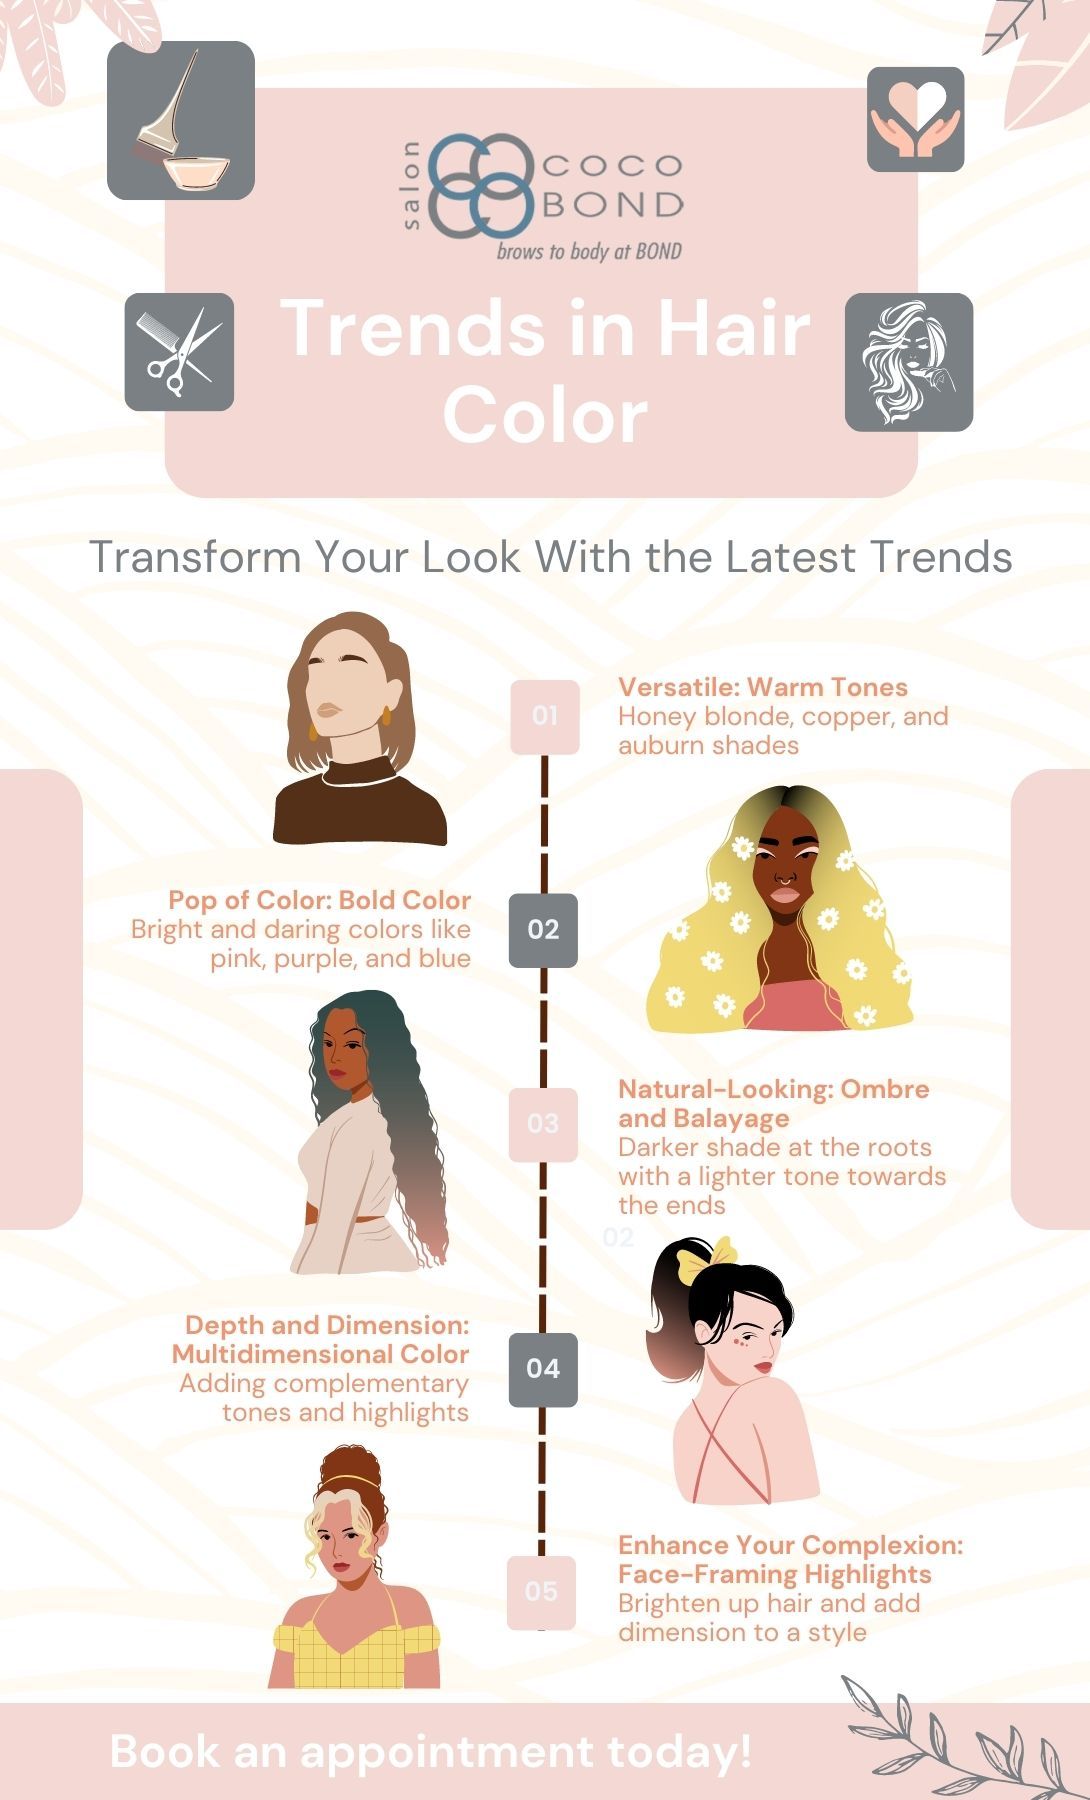 M35192 - Information Infographic - Trends in Hair Color.jpg